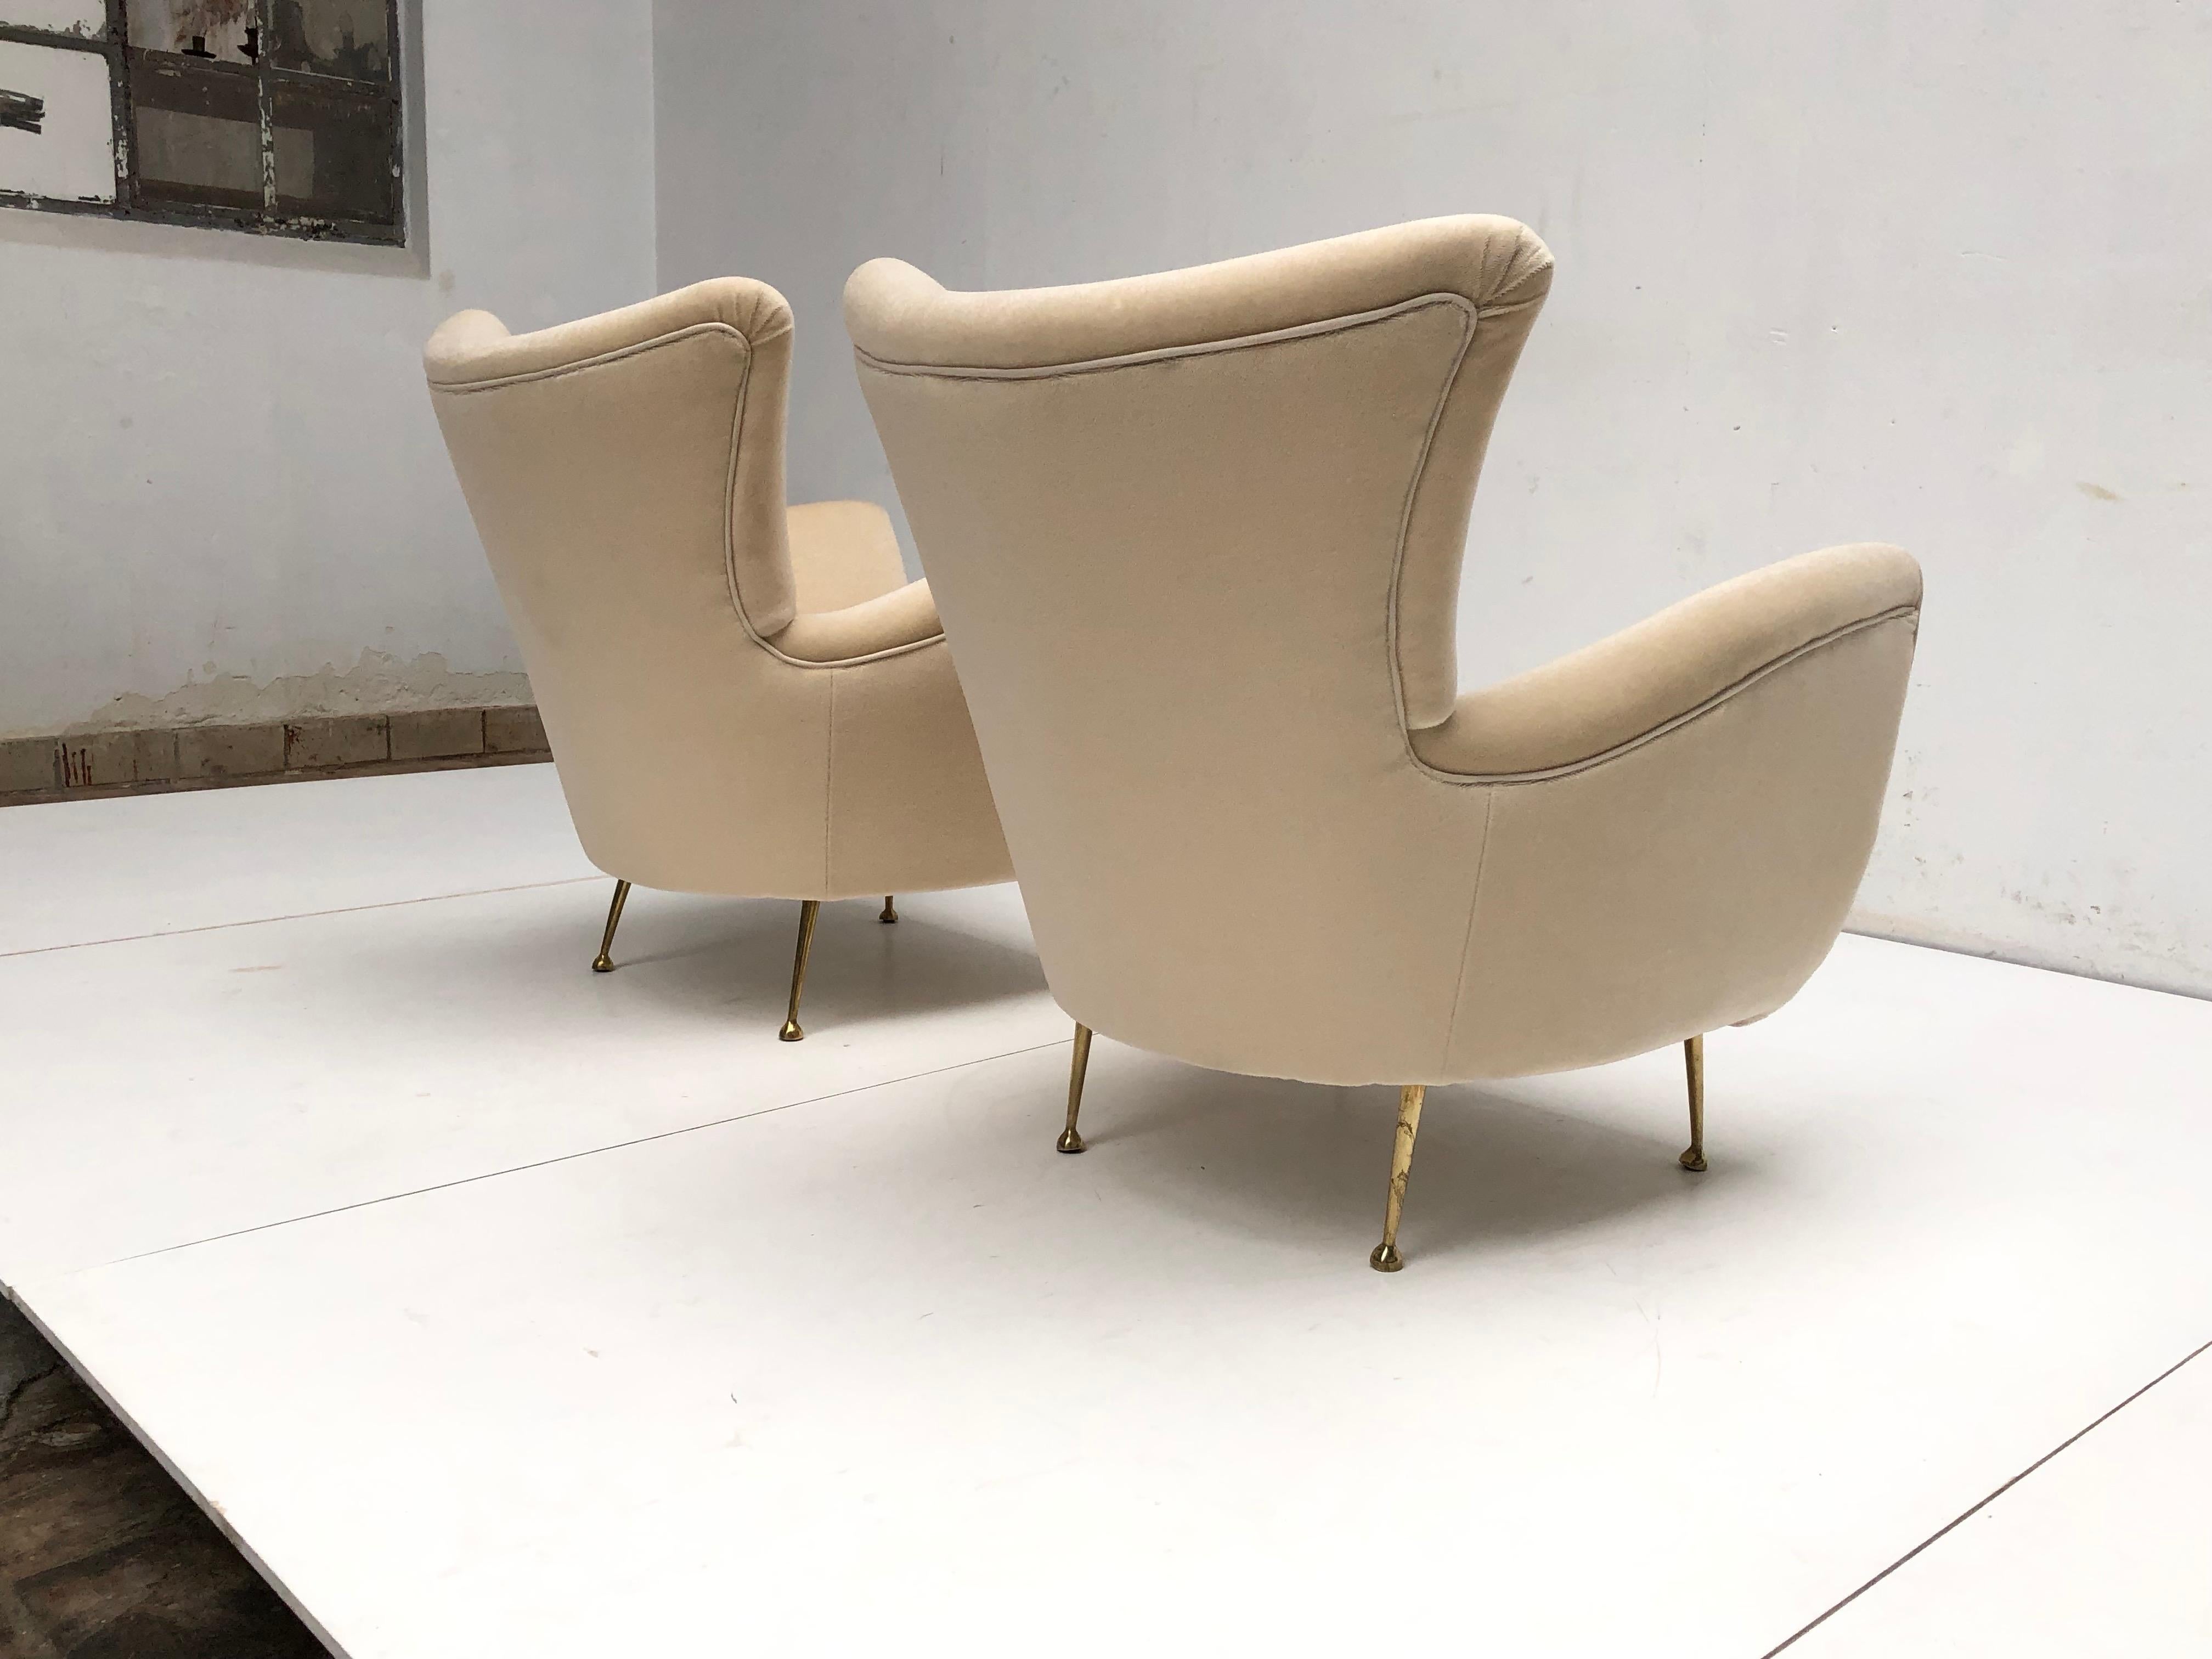 Sculptural Form Lounge Chairs, Mohair Fabric with Brass Legs, ISA, Italy, 1950 For Sale 2